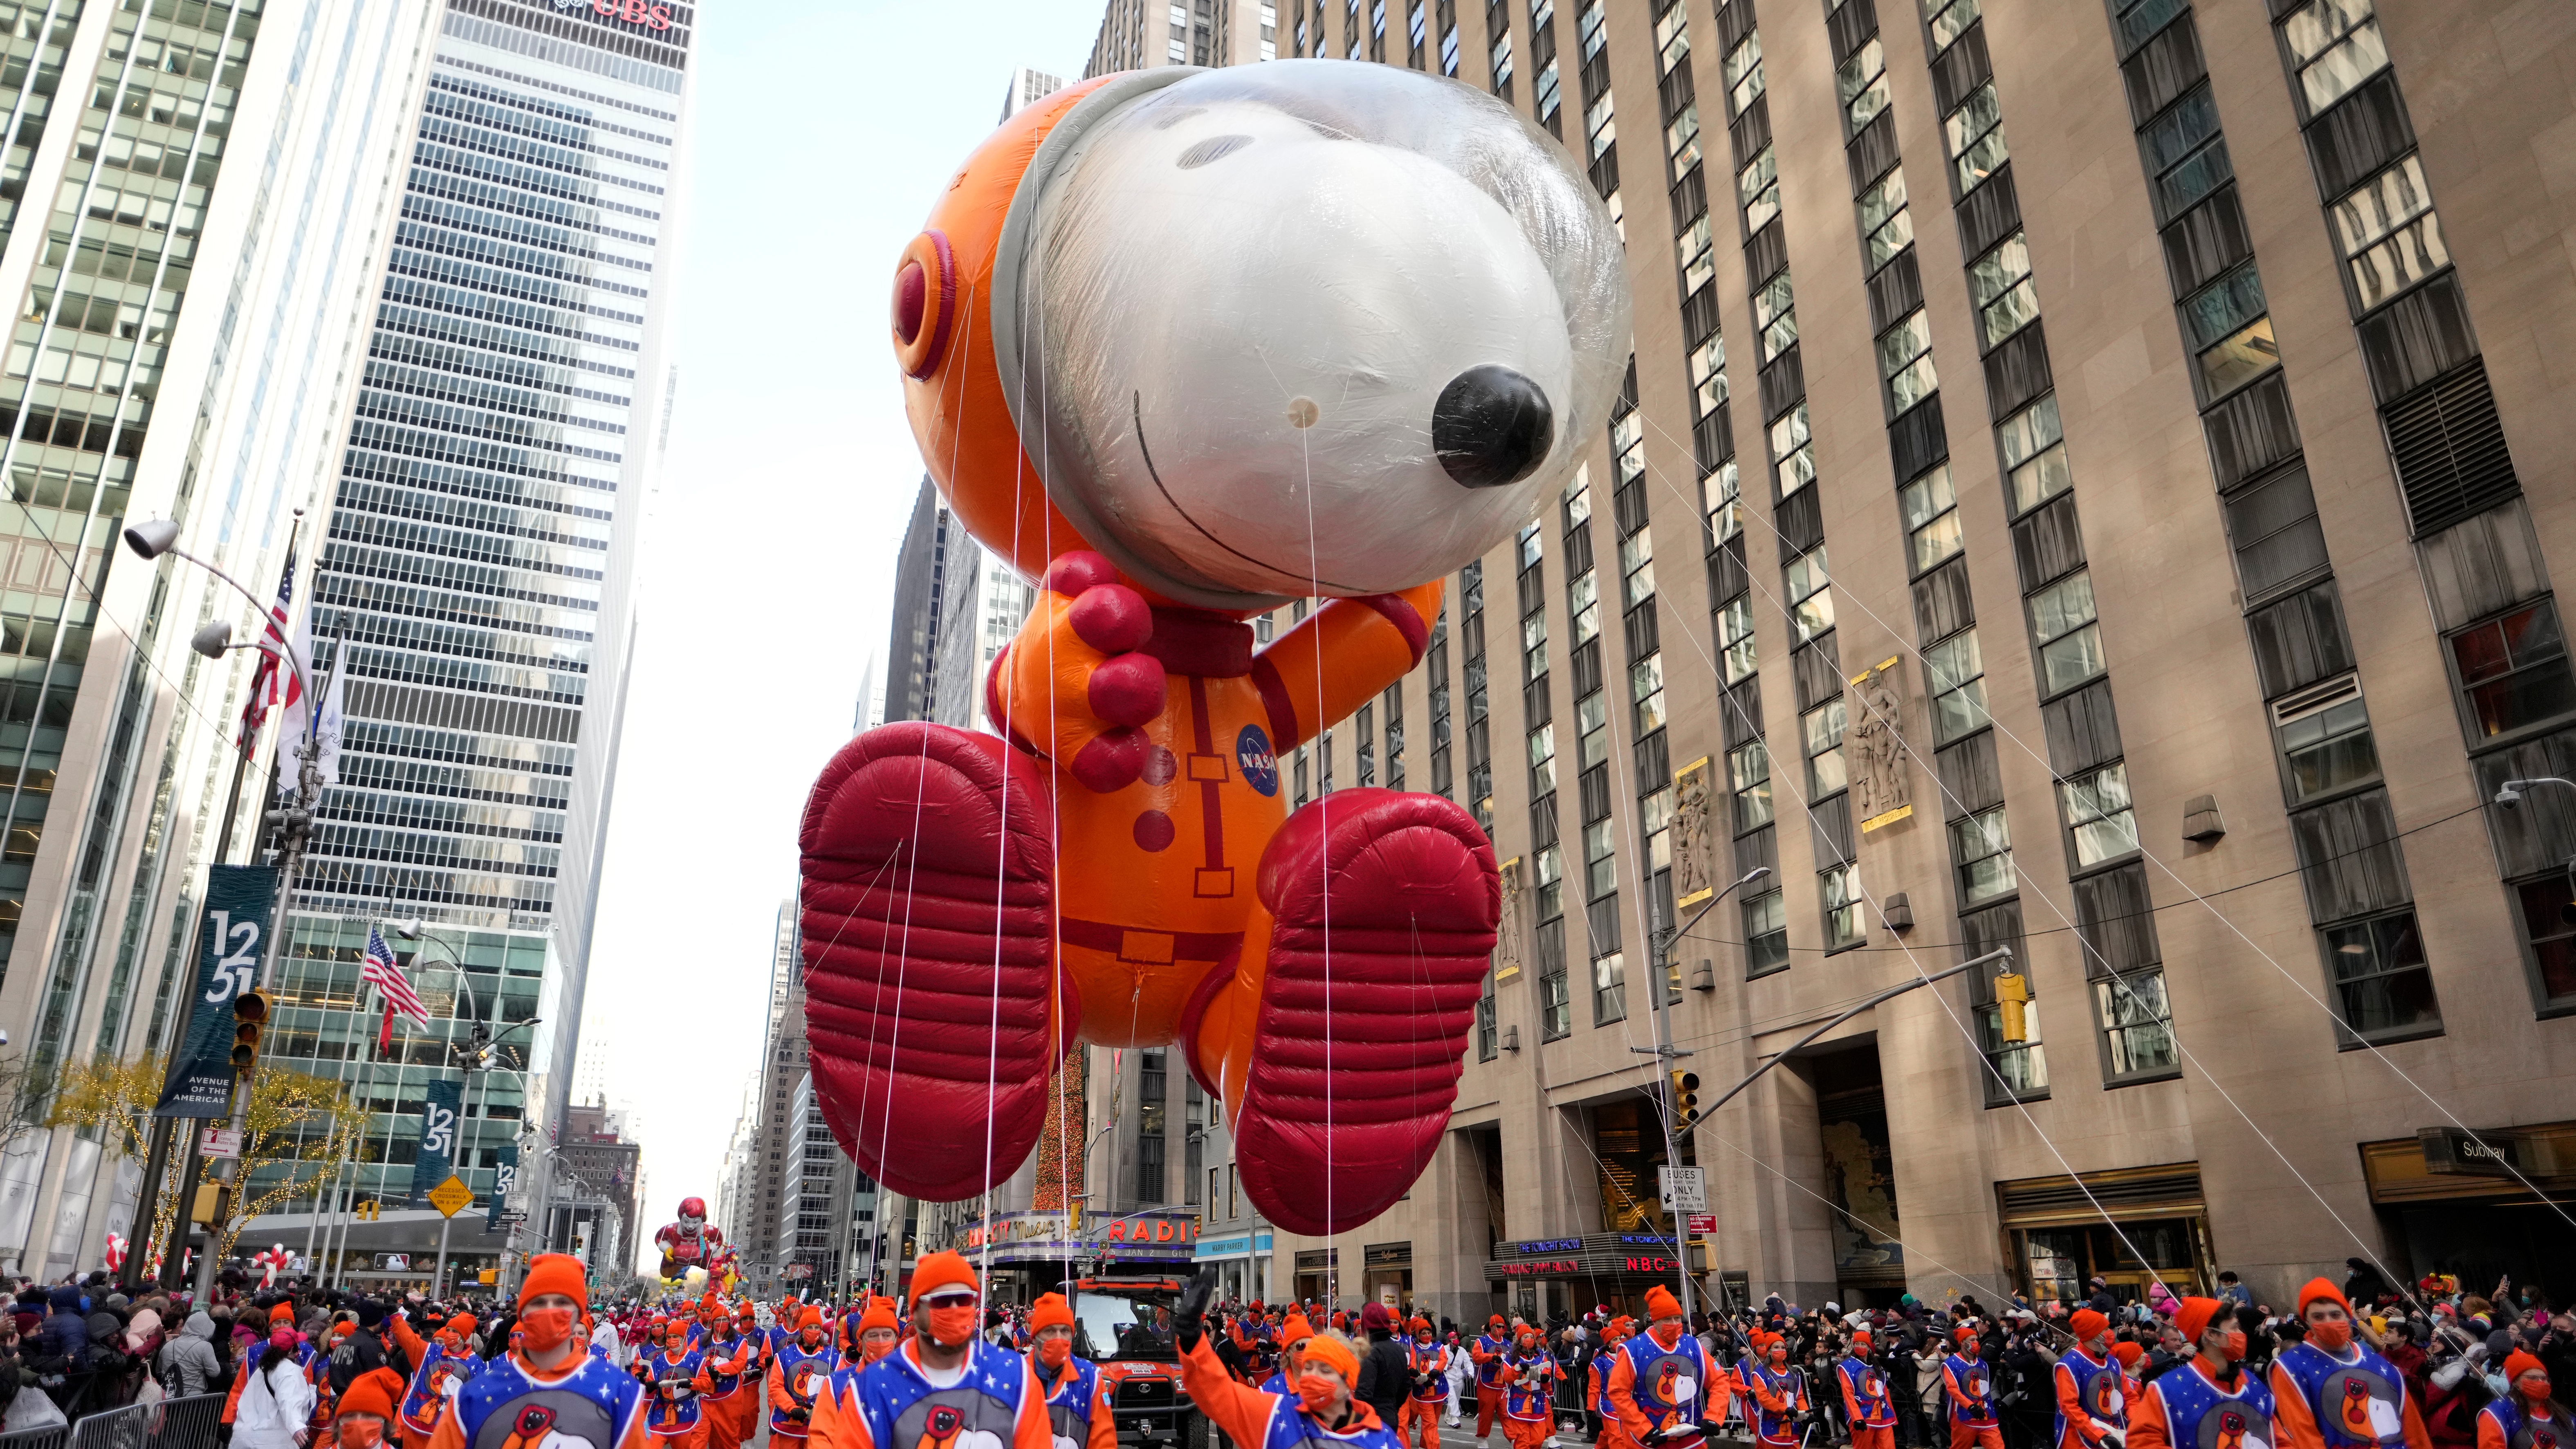 The 97th Annual Macy's Thanksgiving Day Parade (2023)